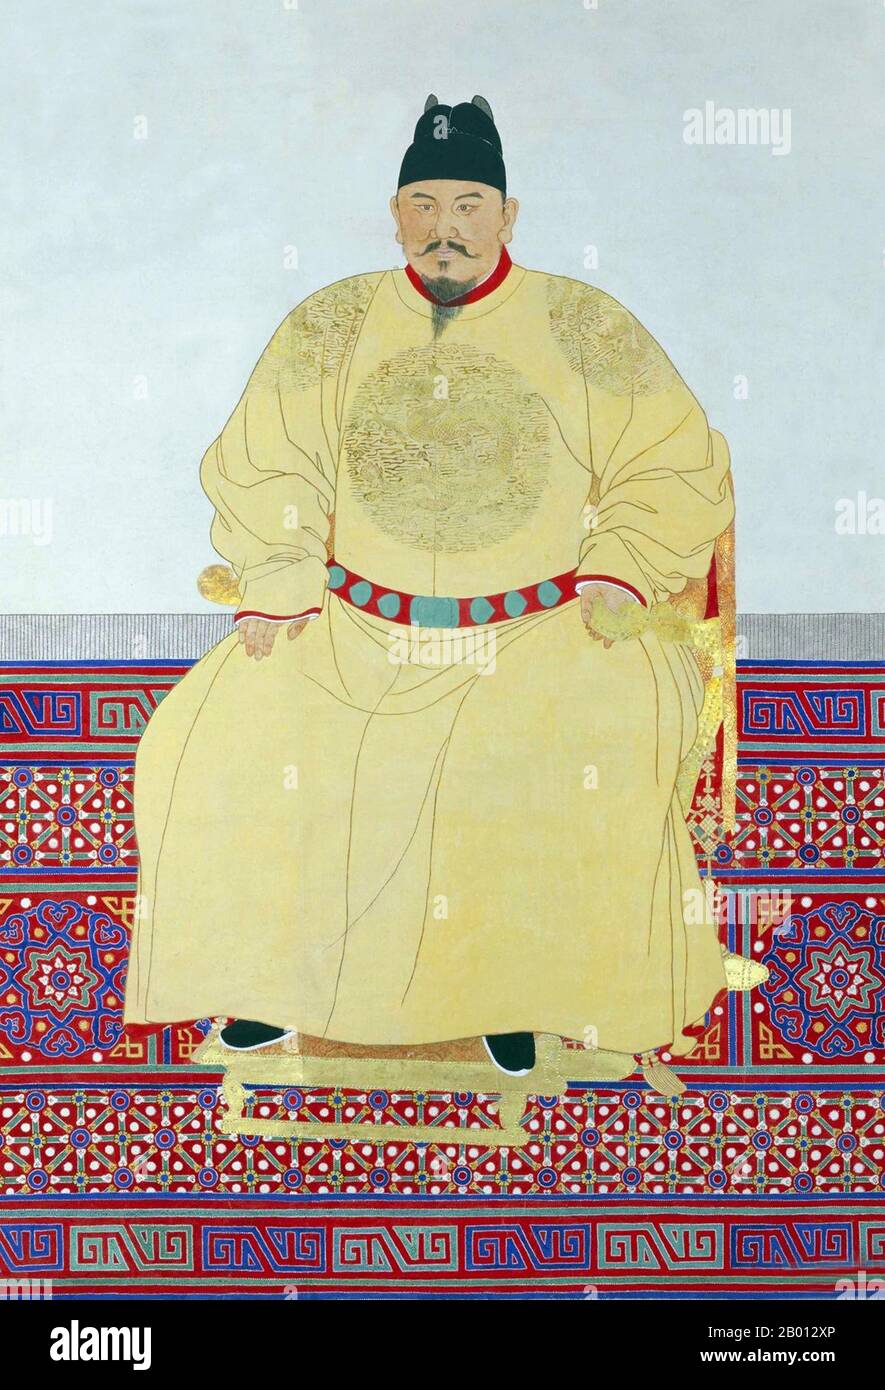 China: Emperor Hongwu, 1st ruler of the Ming Dynasty (r. 1368-1398).  The Hongwu Emperor, personal name Zhu Yuanzhang and temple name Taizu, was the founder and first emperor (1368–98) of the Ming Dynasty of China. His era name, Hongwu, means 'vastly martial'. In the middle of the 14th century, with famine, plagues and peasant revolts sweeping across China, Zhu became a leader of an army that conquered China, ending the Yuan Dynasty and forcing the Mongols to retreat to the Mongolian steppes. With his seizure of the Yuan capital (present-day Beijing), he claimed the Mandate of Heaven. Stock Photo